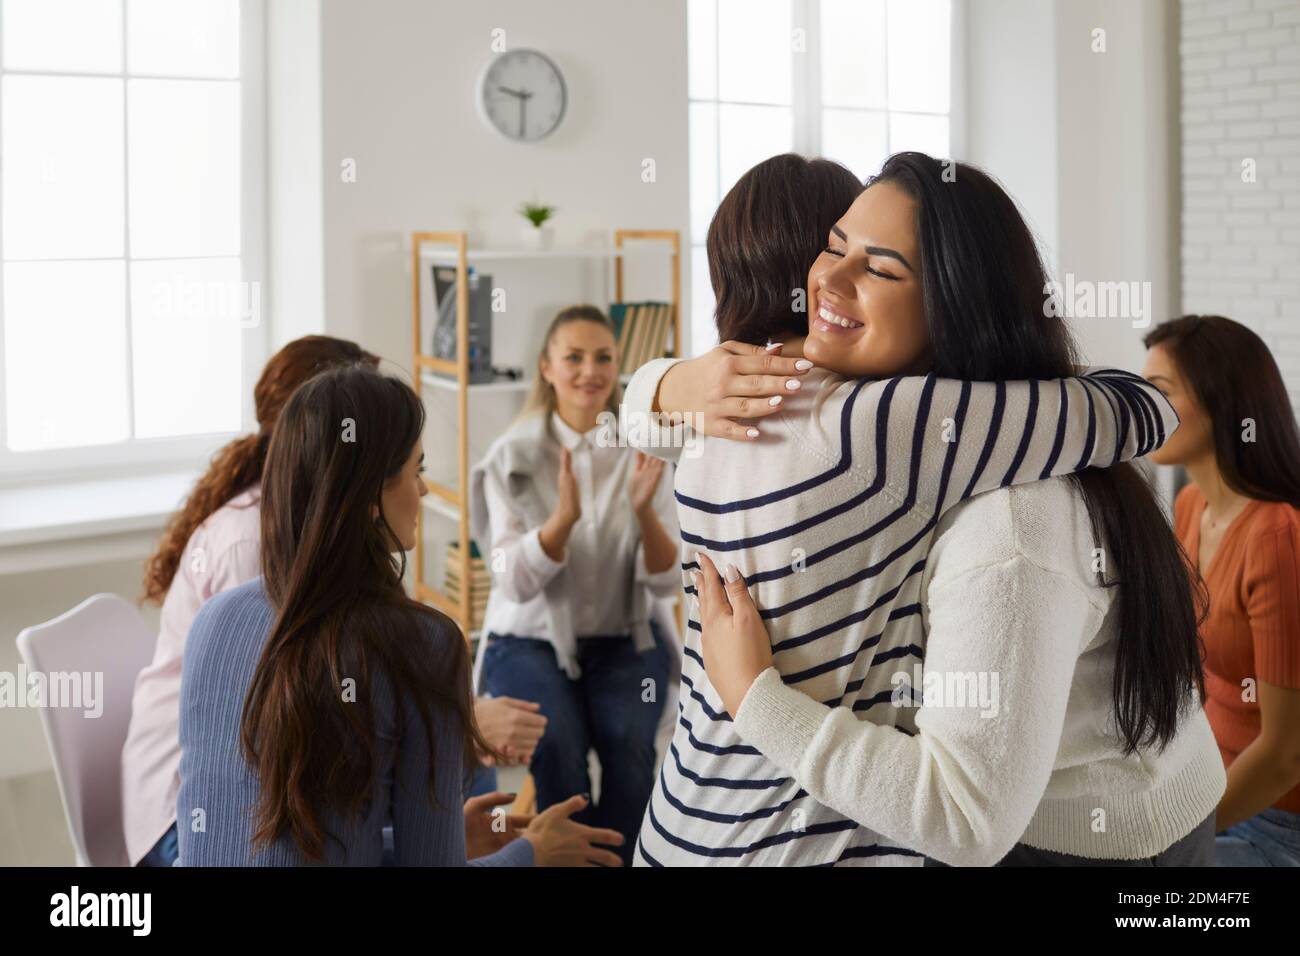 Happy young women hugging each other in support group meeting or therapy session Stock Photo